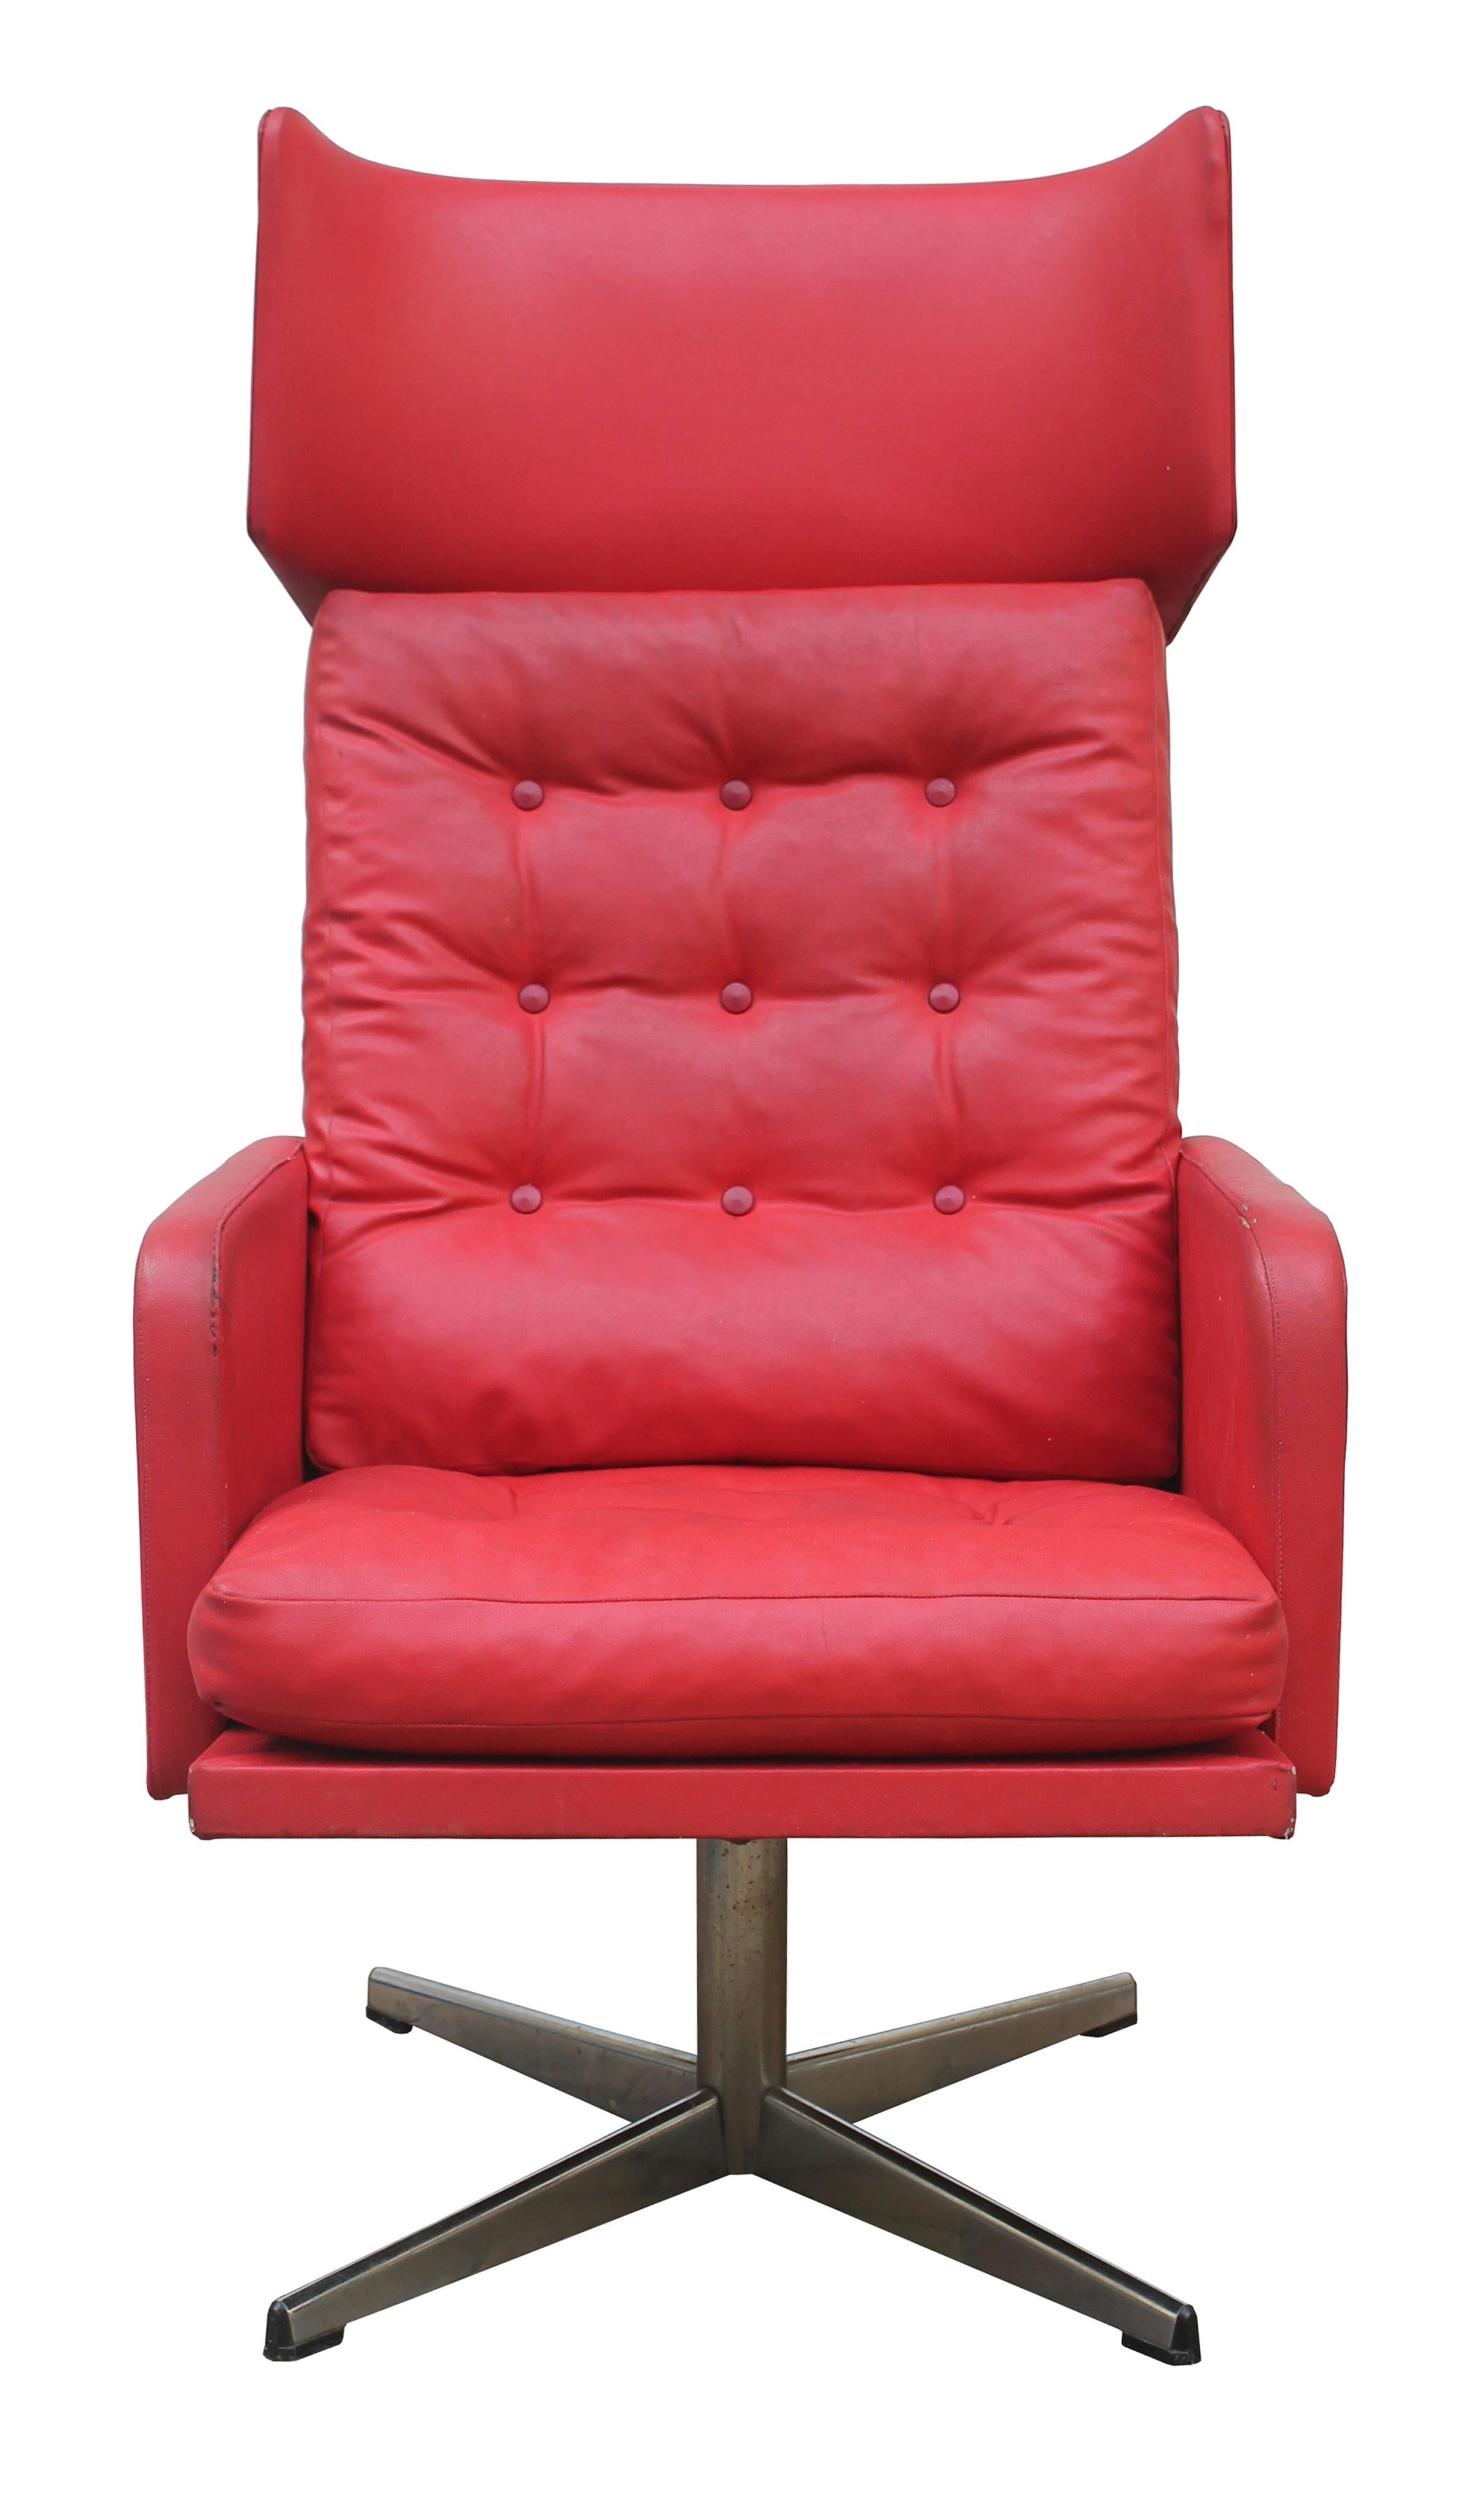 Bold and beautiful, this bright pillar red swivel armchair is a welcome pop of colour in any interior.

An original 1970s armchair made in the Czechoslovakian communist era and this piece was seen as the height of luxury. It was almost impossible to